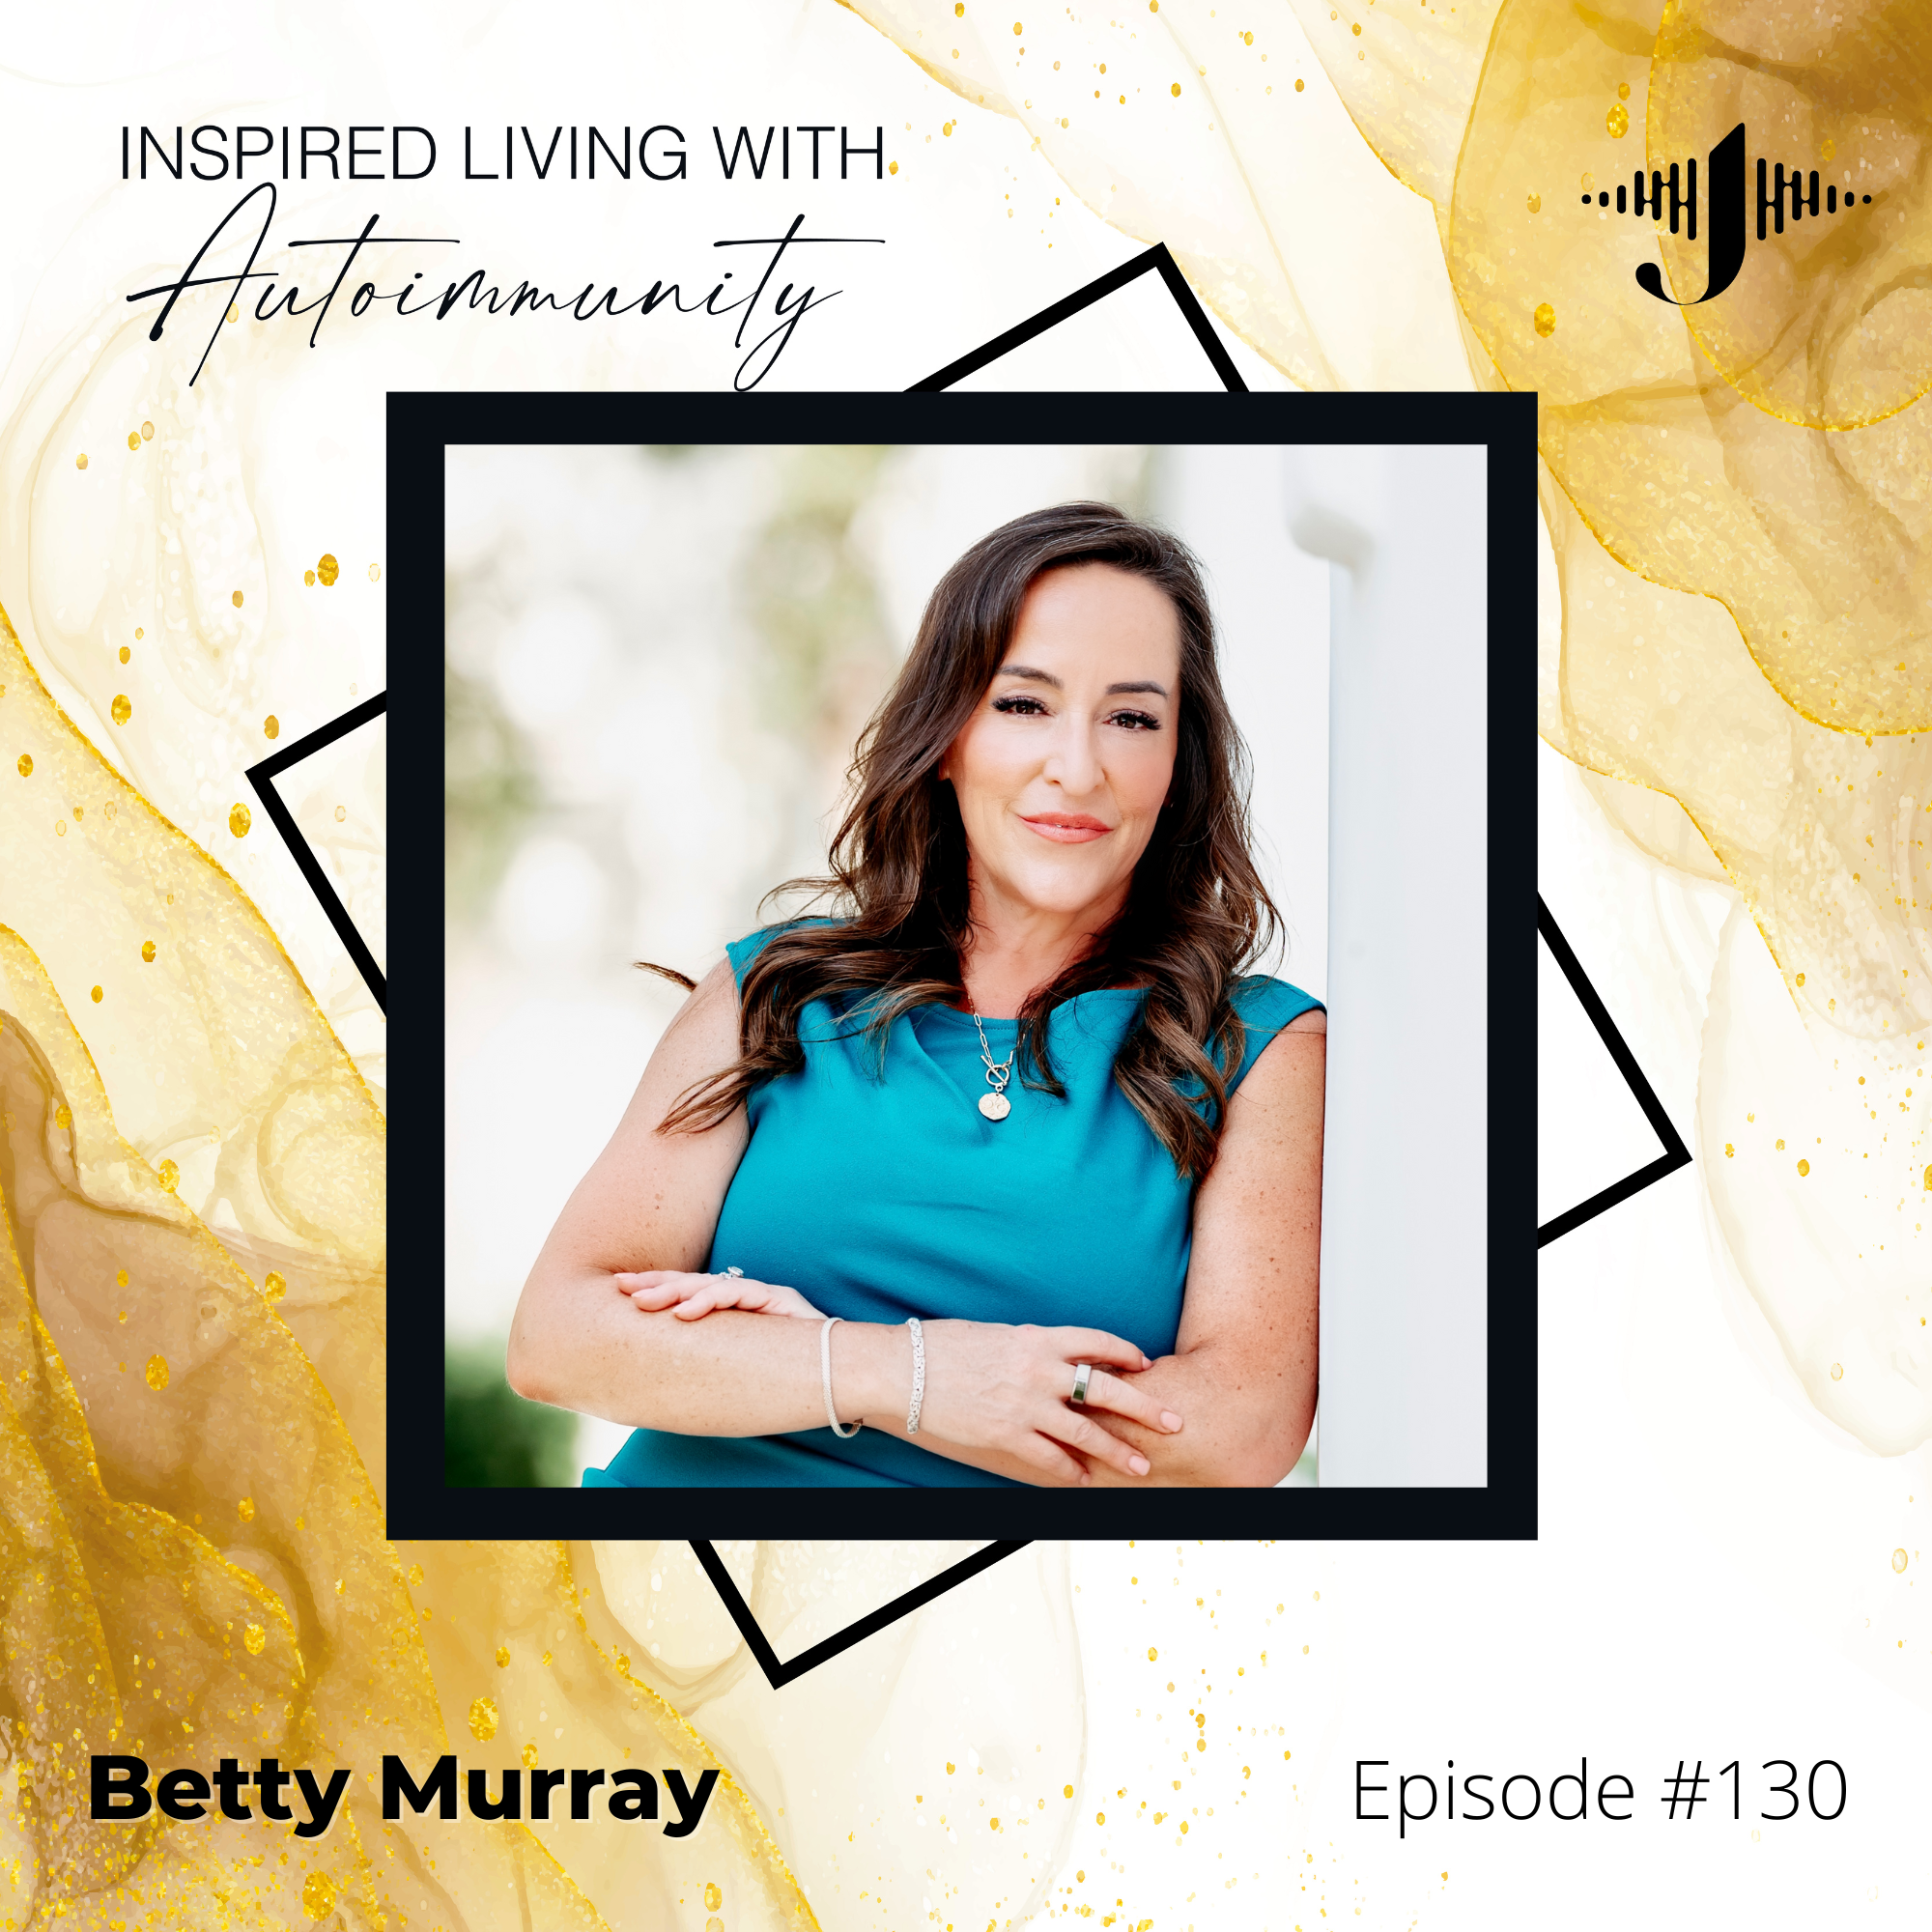 Betty Murray: Modern Approaches to Hormonal Balance and Autoimmune Recovery